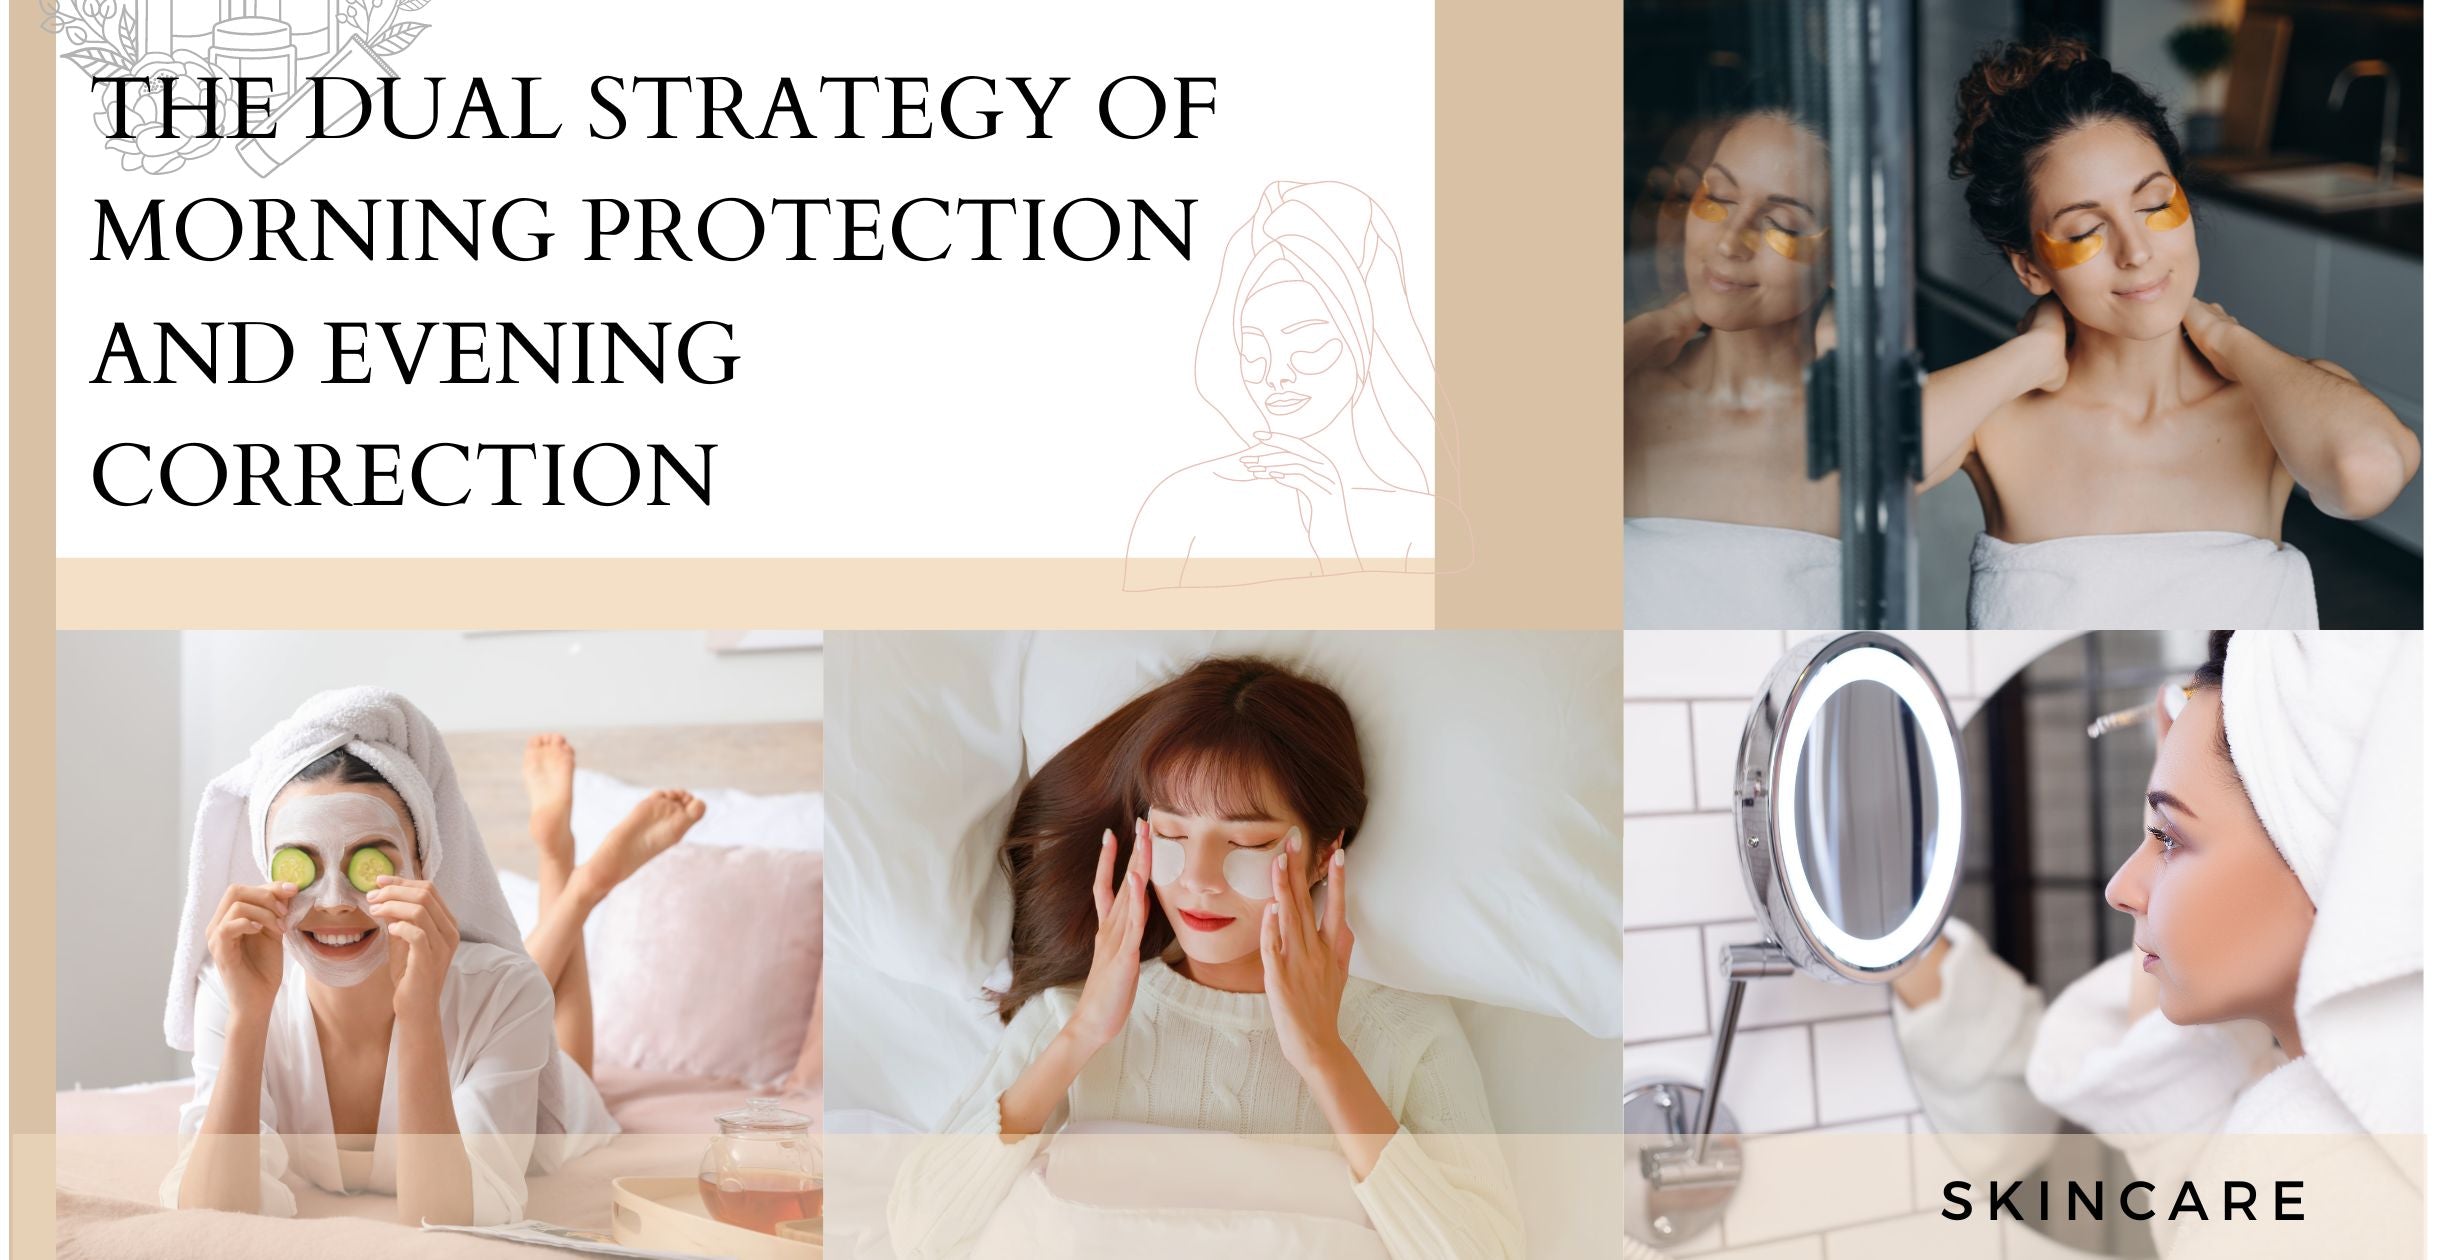 The Dual Strategy of Morning Protection and Evening Correction